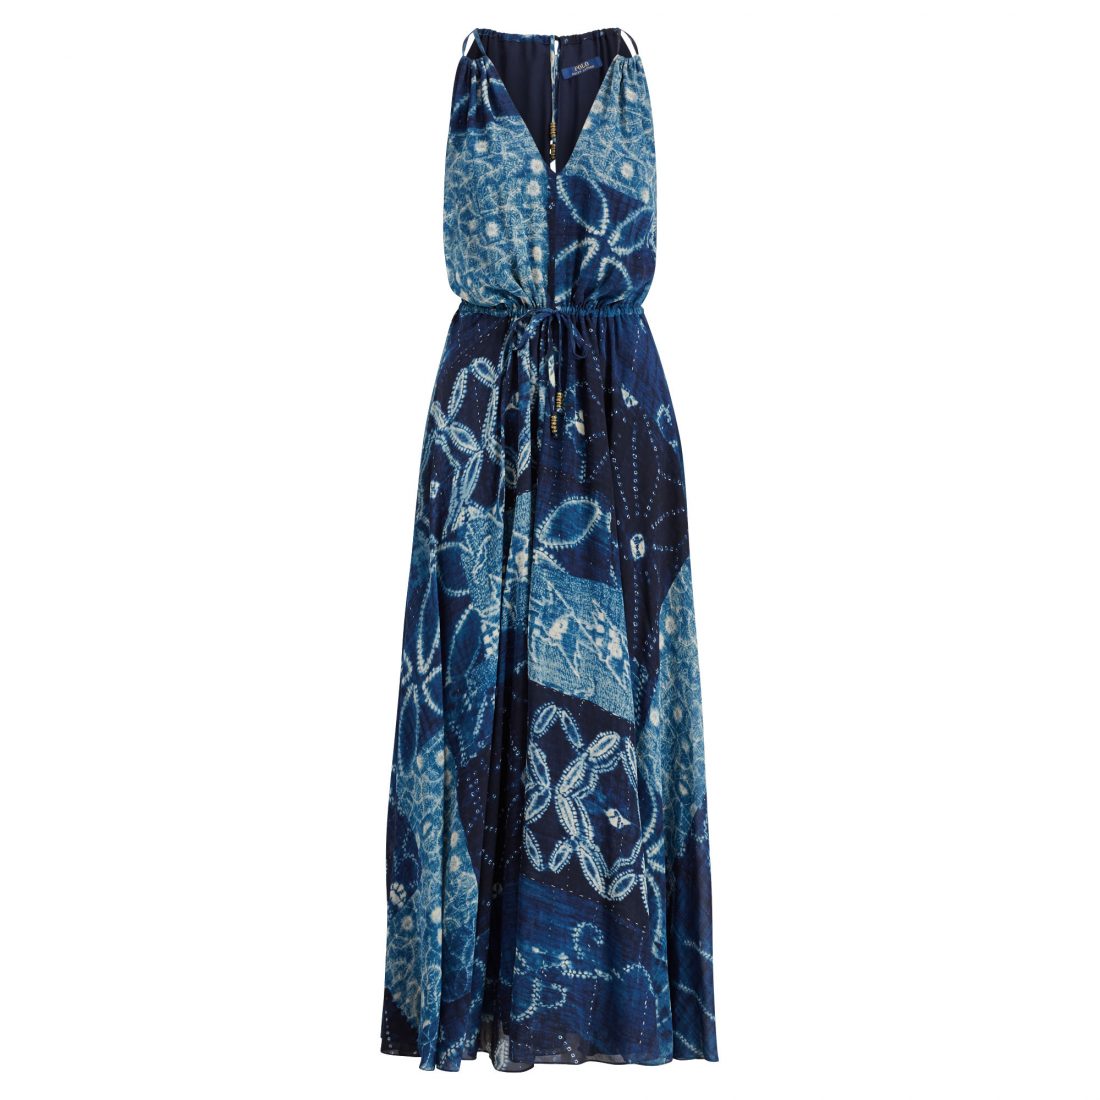 Top 15 summer dresses to rock in the sun